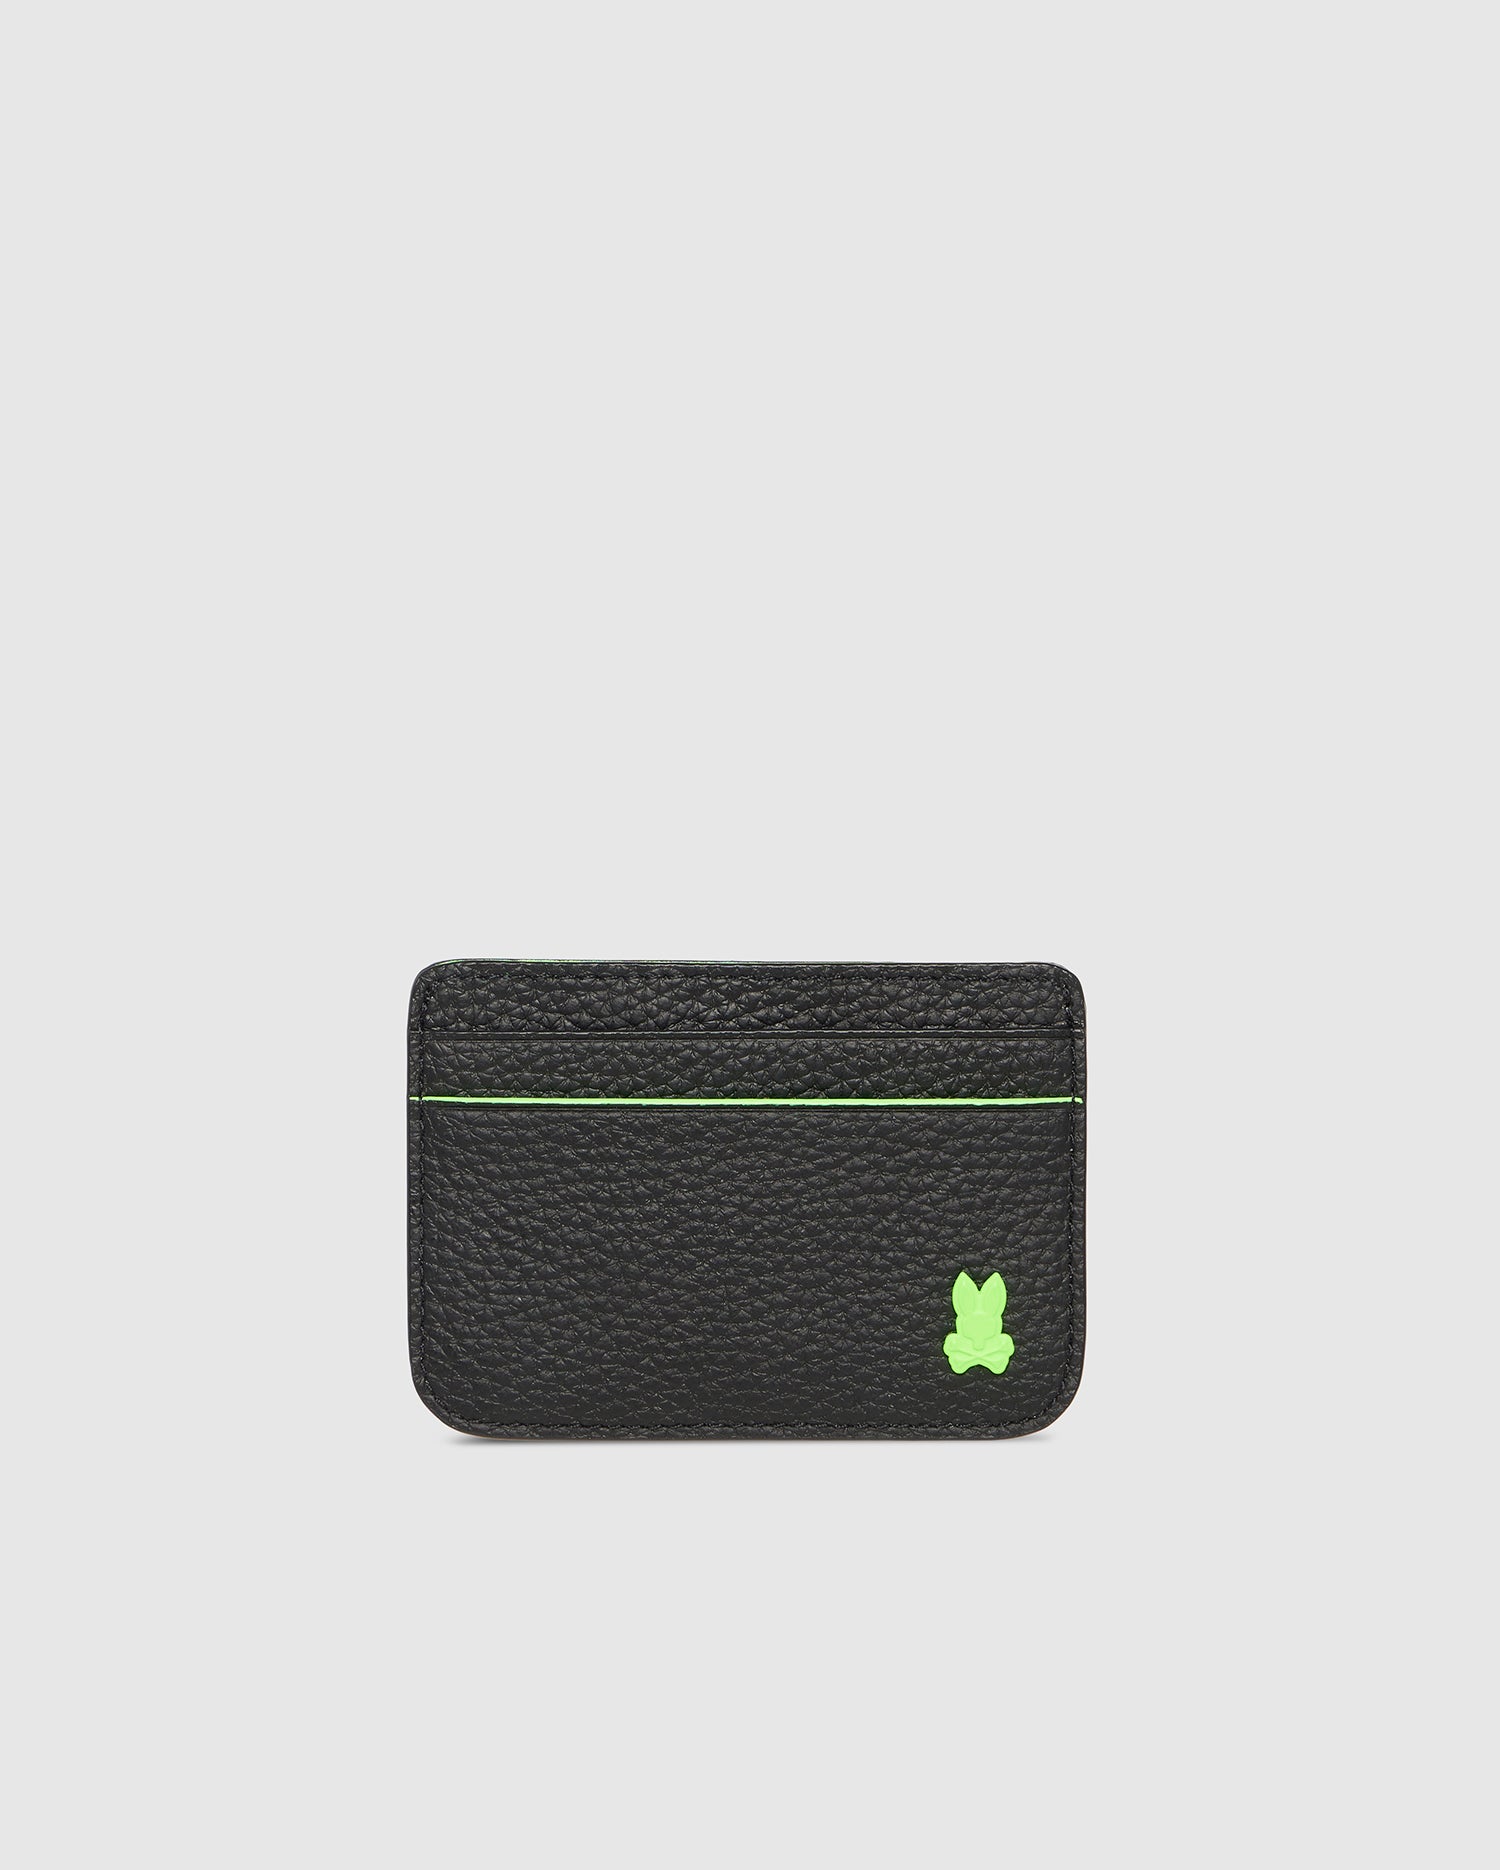 A sleek black leather cardholder with a green stitched accent line across the top and a small green bunny patch in the bottom right corner against a plain white background, Psycho Bunny's CARD CASE - B6A409B200.